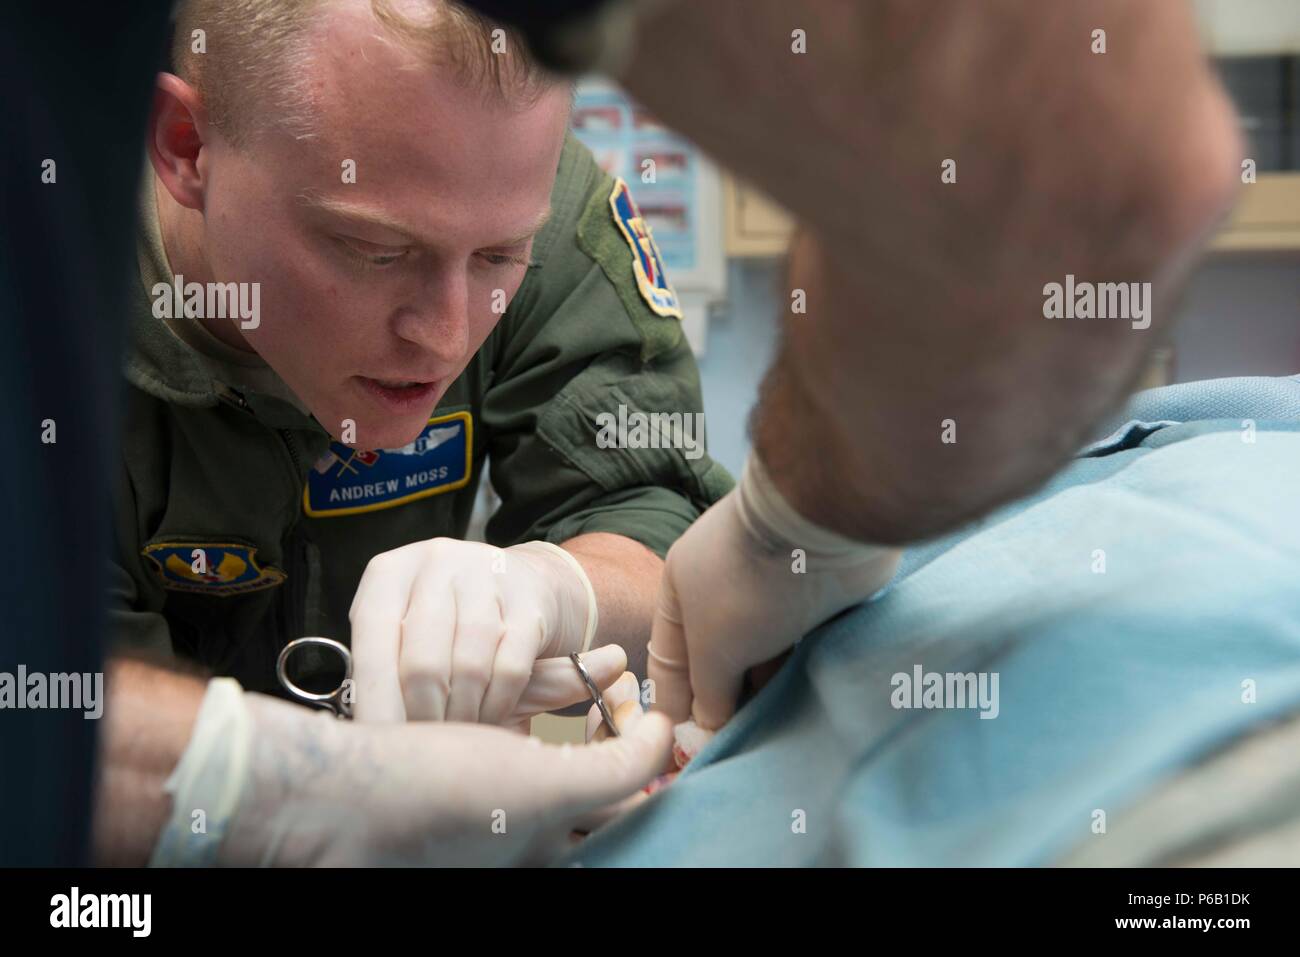 U.S. Air Force Capt. Andrew Moss, 39th Medical Operations Squadron flight surgeon, performs a cyst removal May 19, 2016, at Incirlik Air Base, Turkey. Flight surgeons are primary care physicians for aircrew members. (U.S. Air Force photo by Senior Airman John Nieves Camacho/Released) Stock Photo